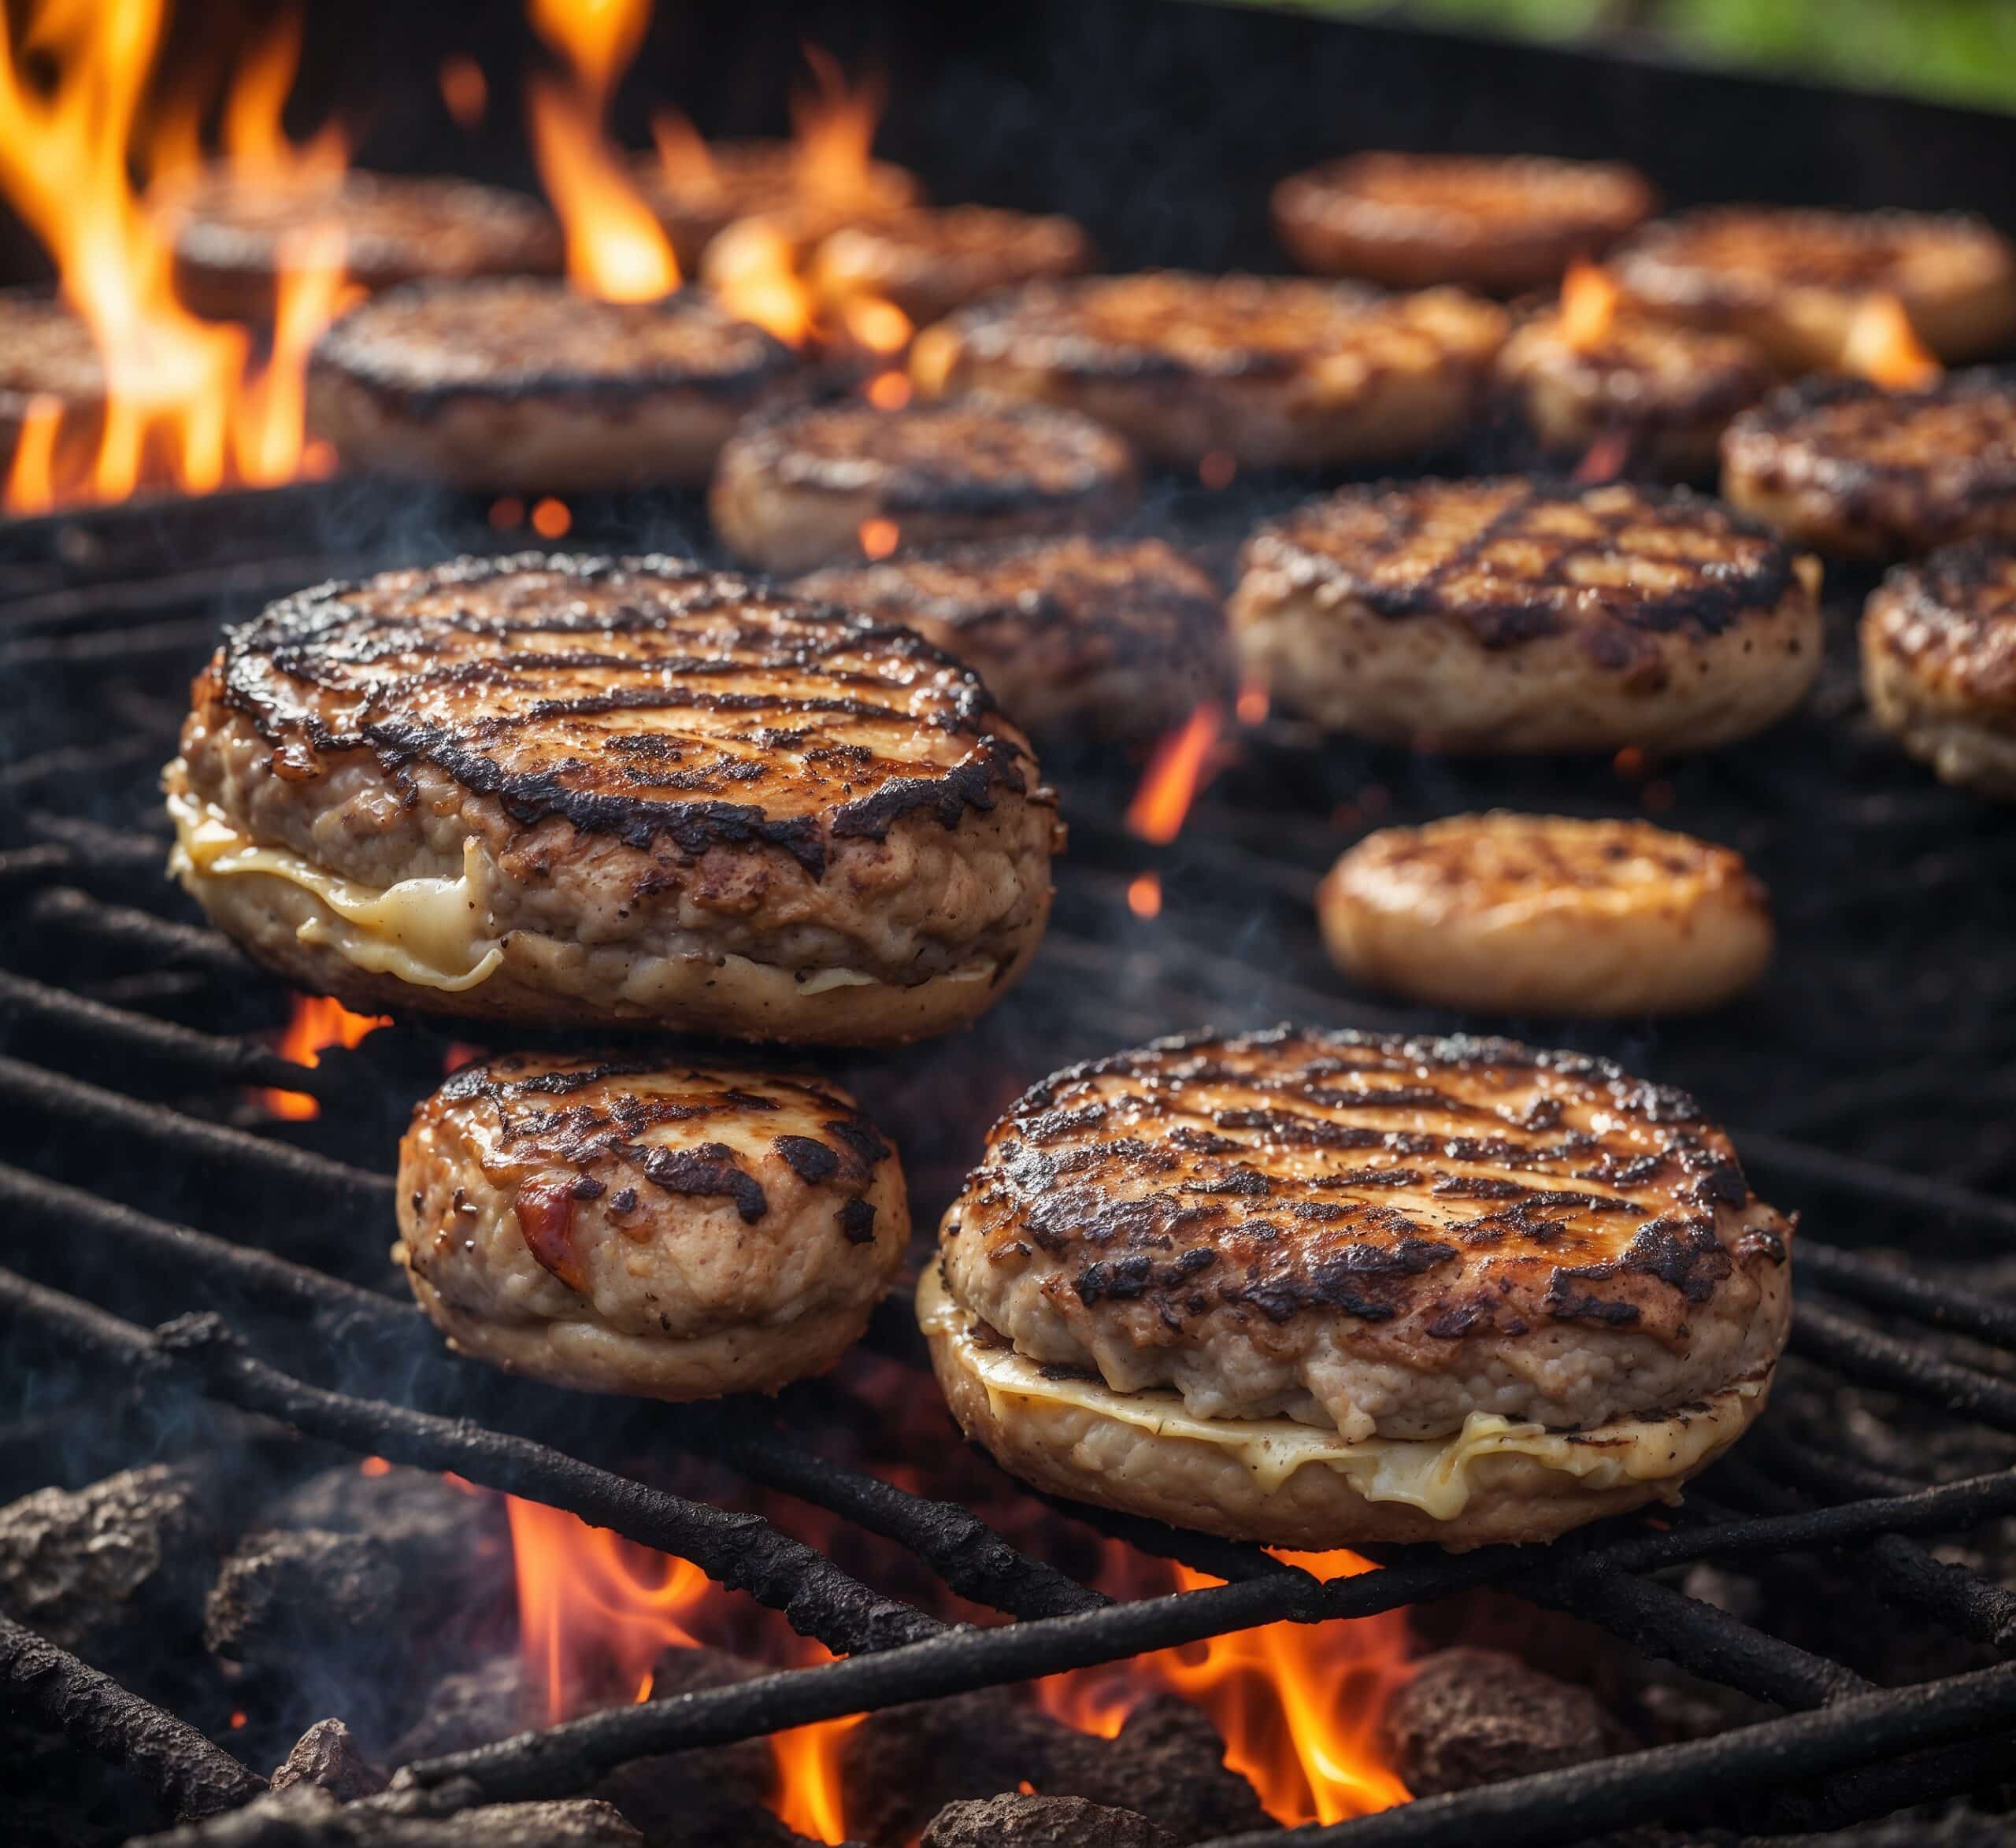 www.appr.com : How Long To Cook Burgers On Charcoal Grill?